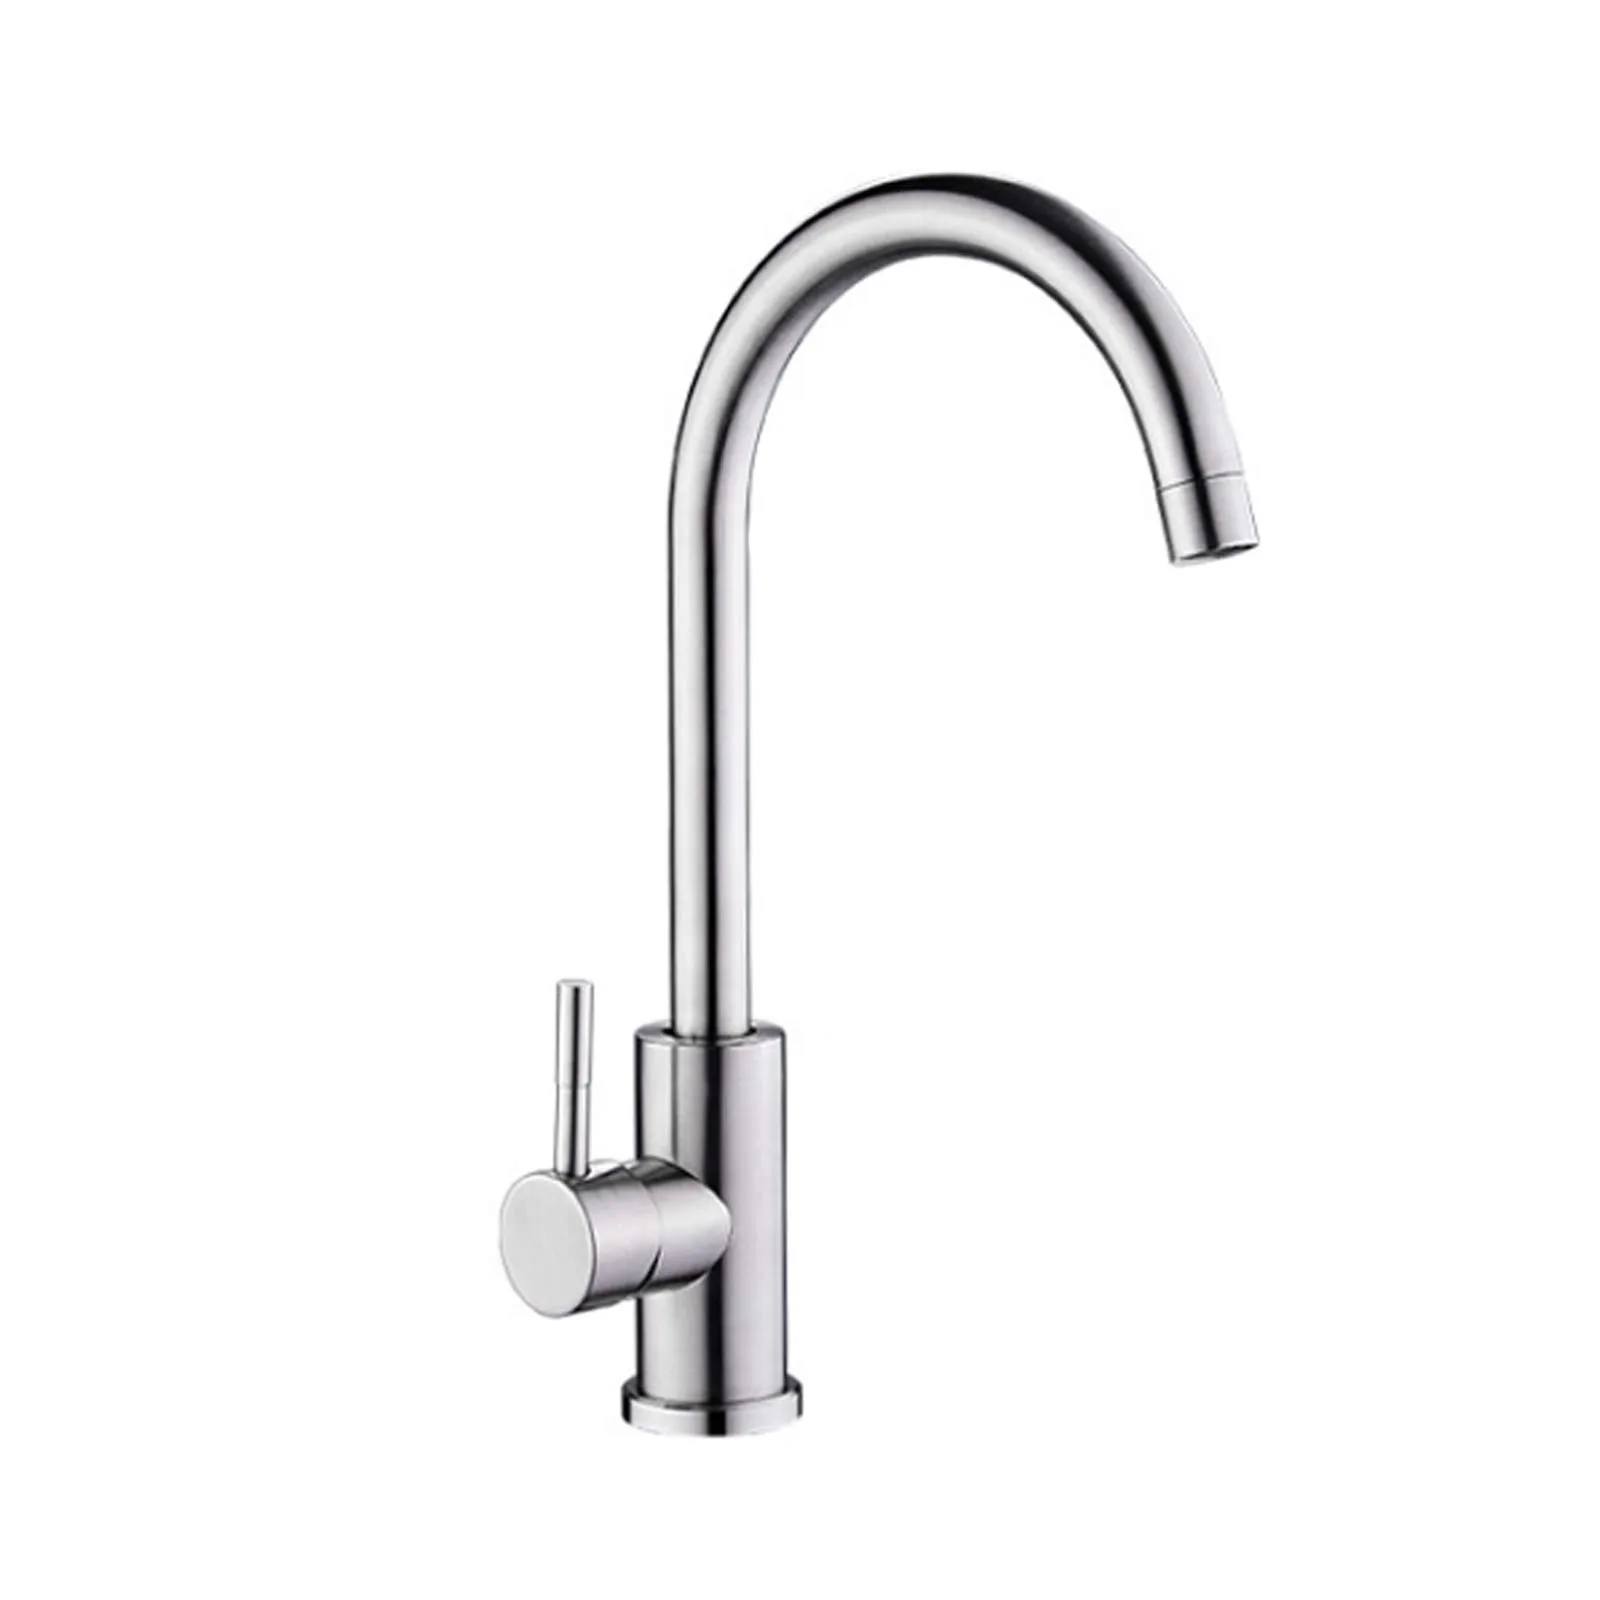 

Brushed Nickel Stainless Steel Kitchen Sink Taps 360 Degree Swivel Spout Single Cold Water For Twin Drainer Sinks Kitchen Faucet